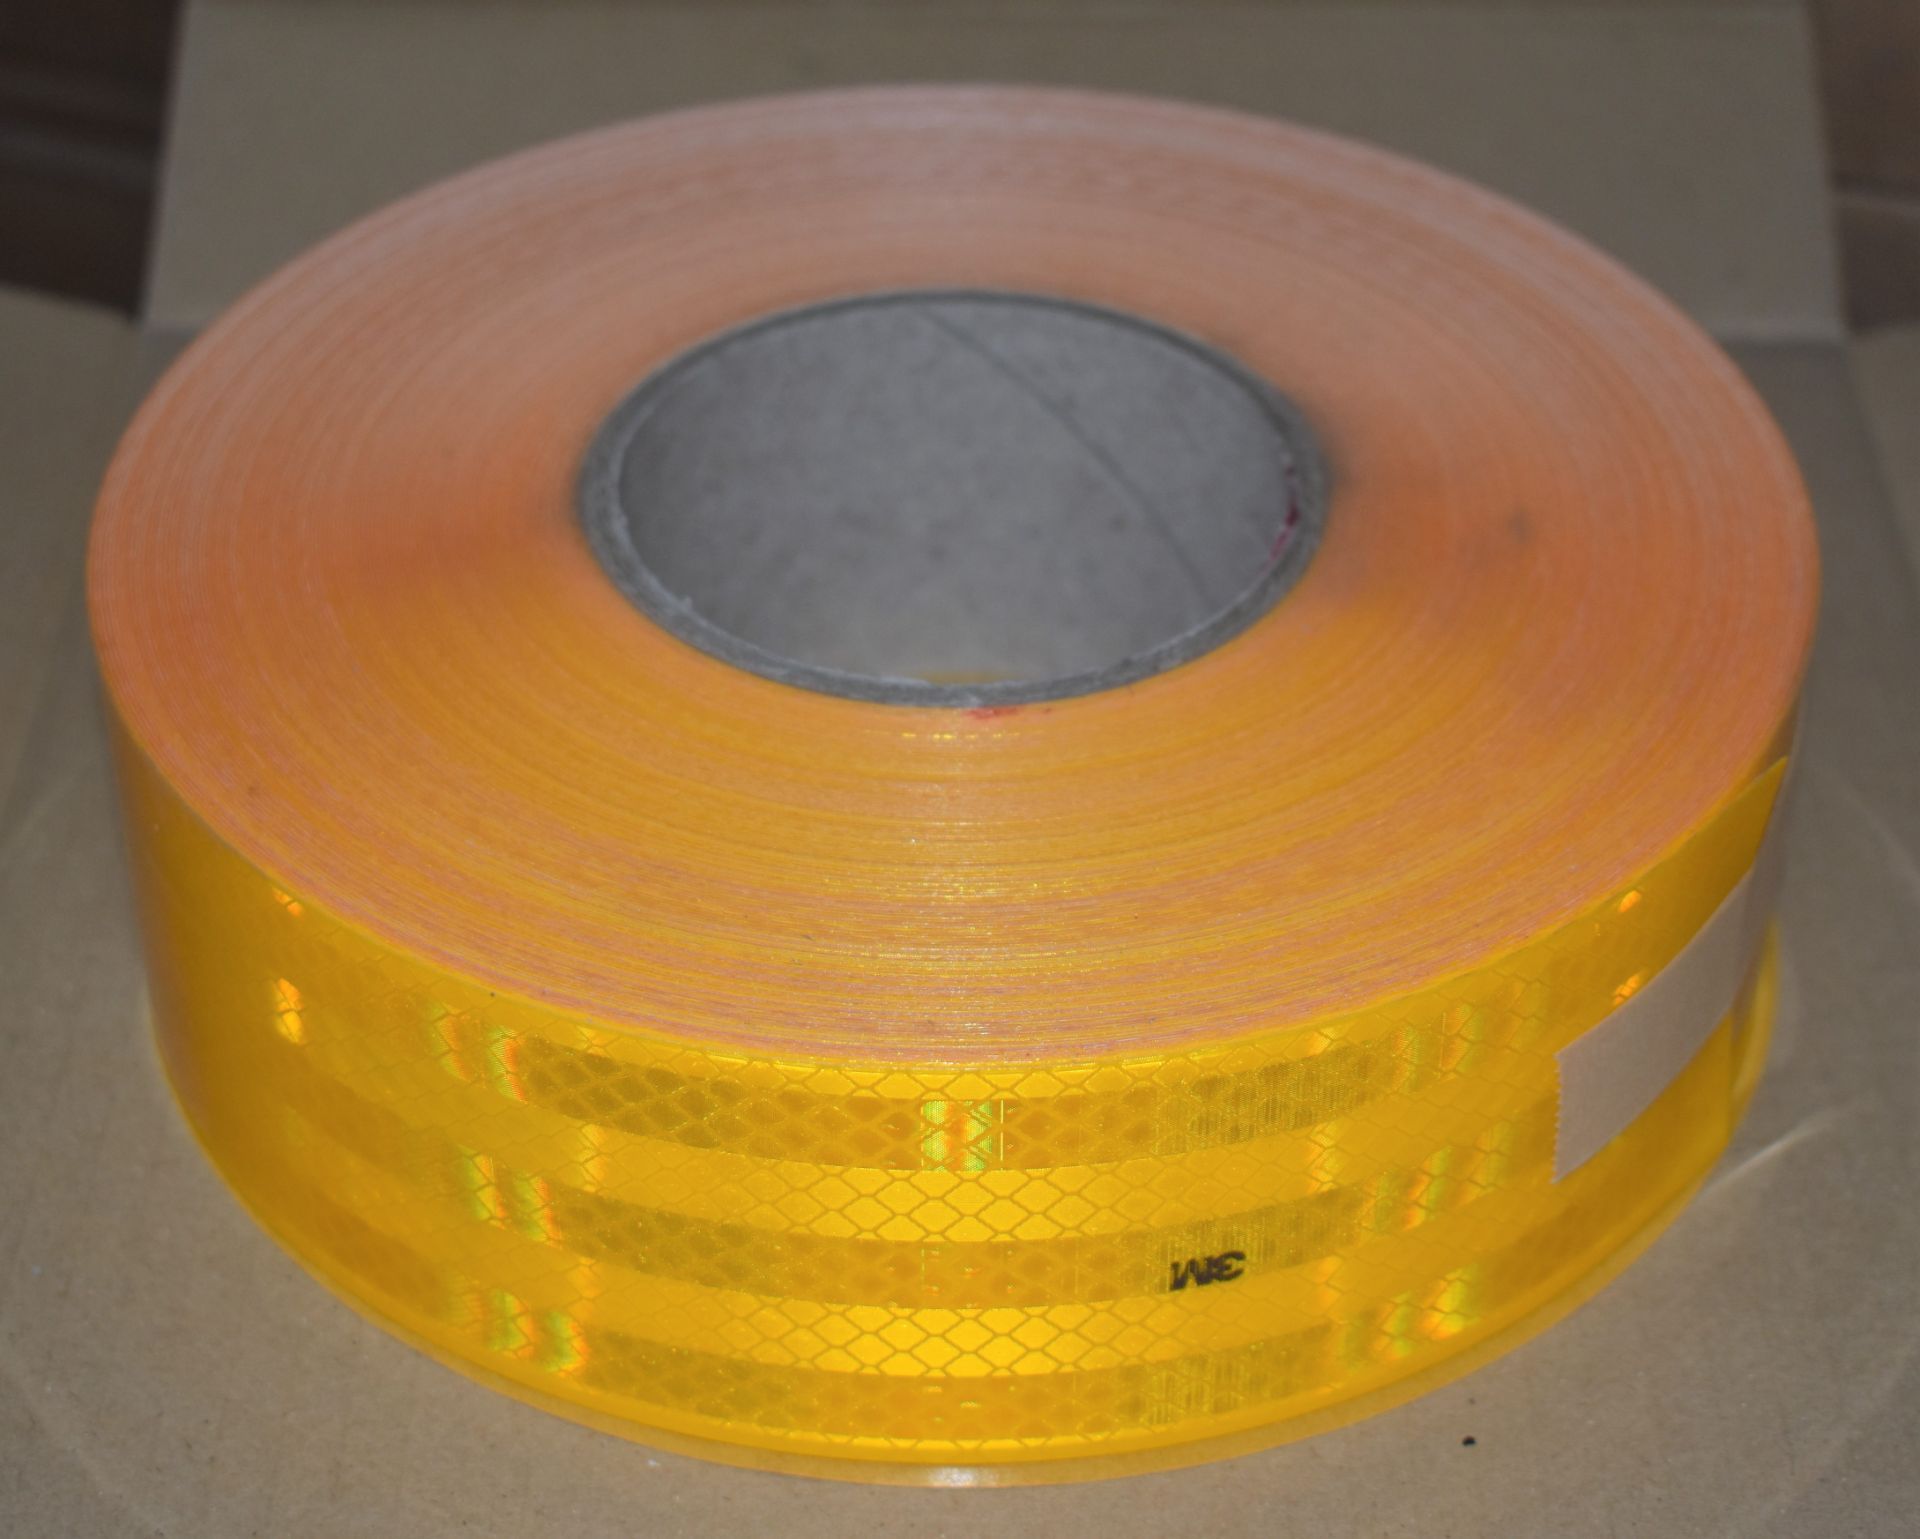 1 x Roll of 3M Conspicuity Tape Reflective Sheeting - Size 55mm x 50m - Diamond Grade - Colour - Image 5 of 5